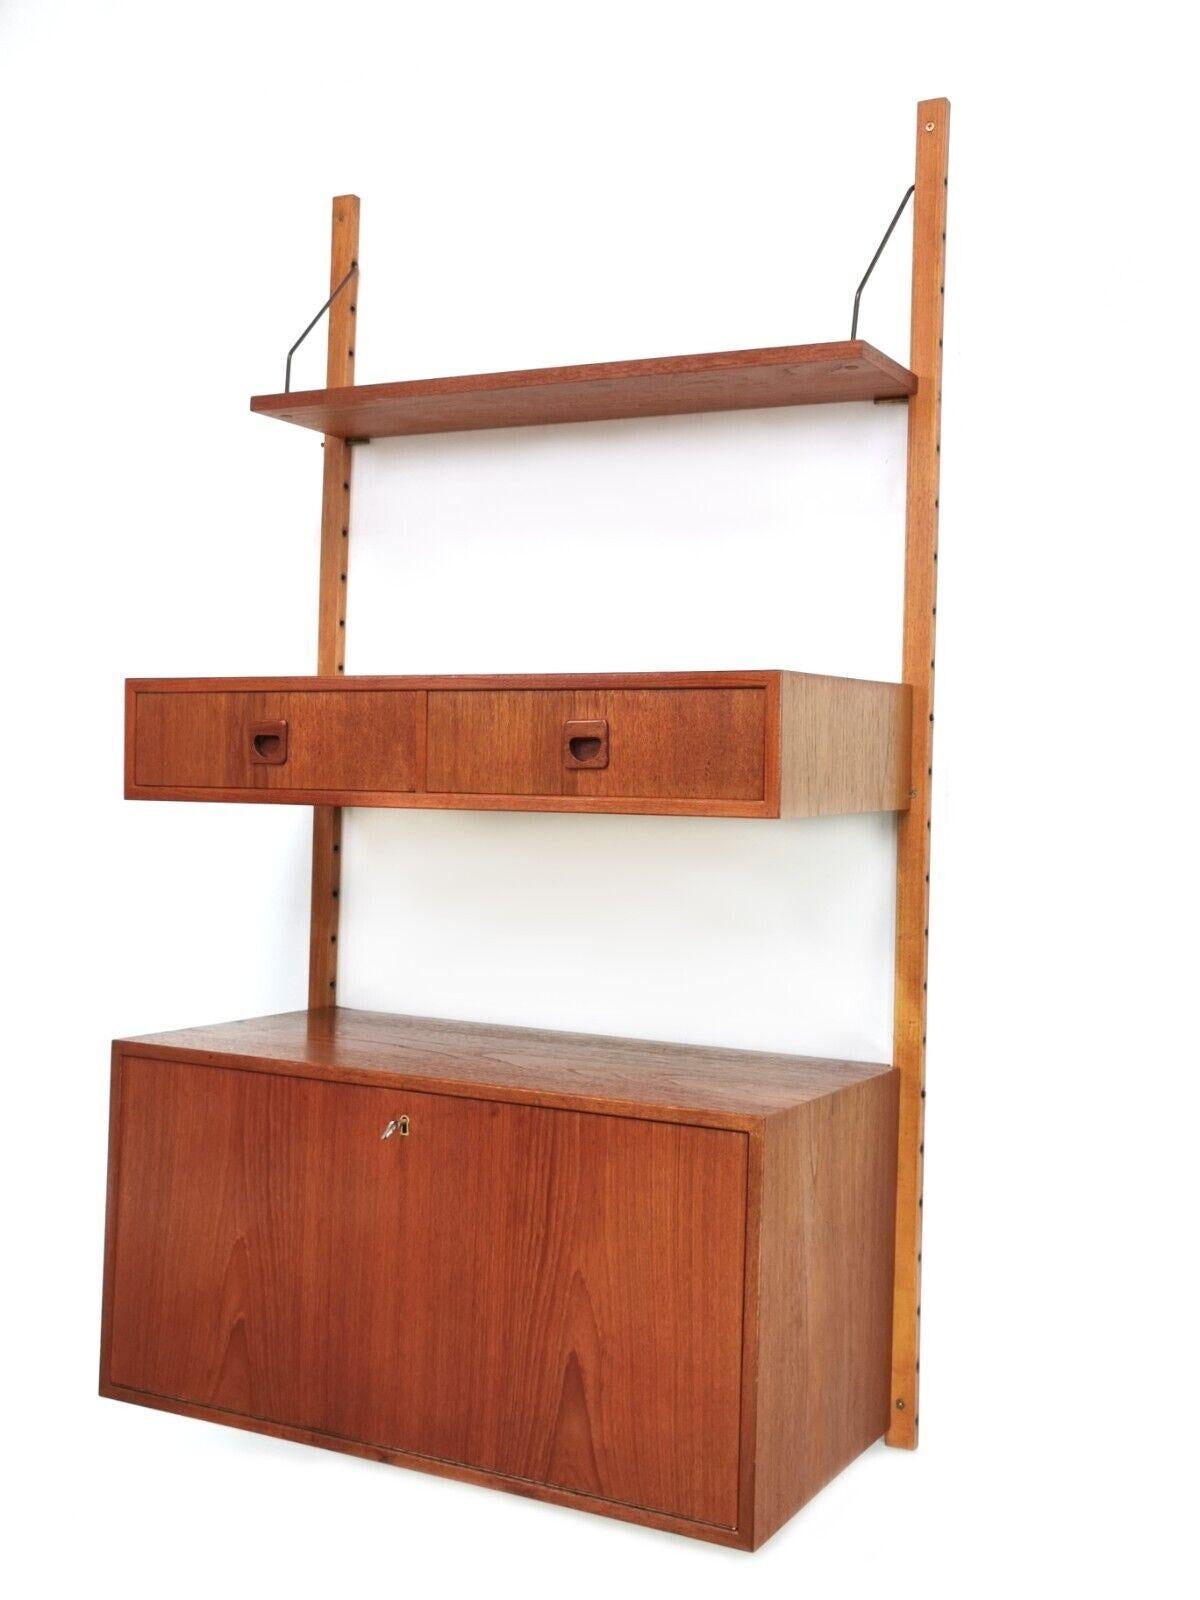 Danish teak modular Mid Century wall unit

Adjustable single bay mid century teak wall unit.

Arrange as you wish, but as it stands in the picture, the lower section consists of a fall front lockable mirrored cabinet. The middle section has two